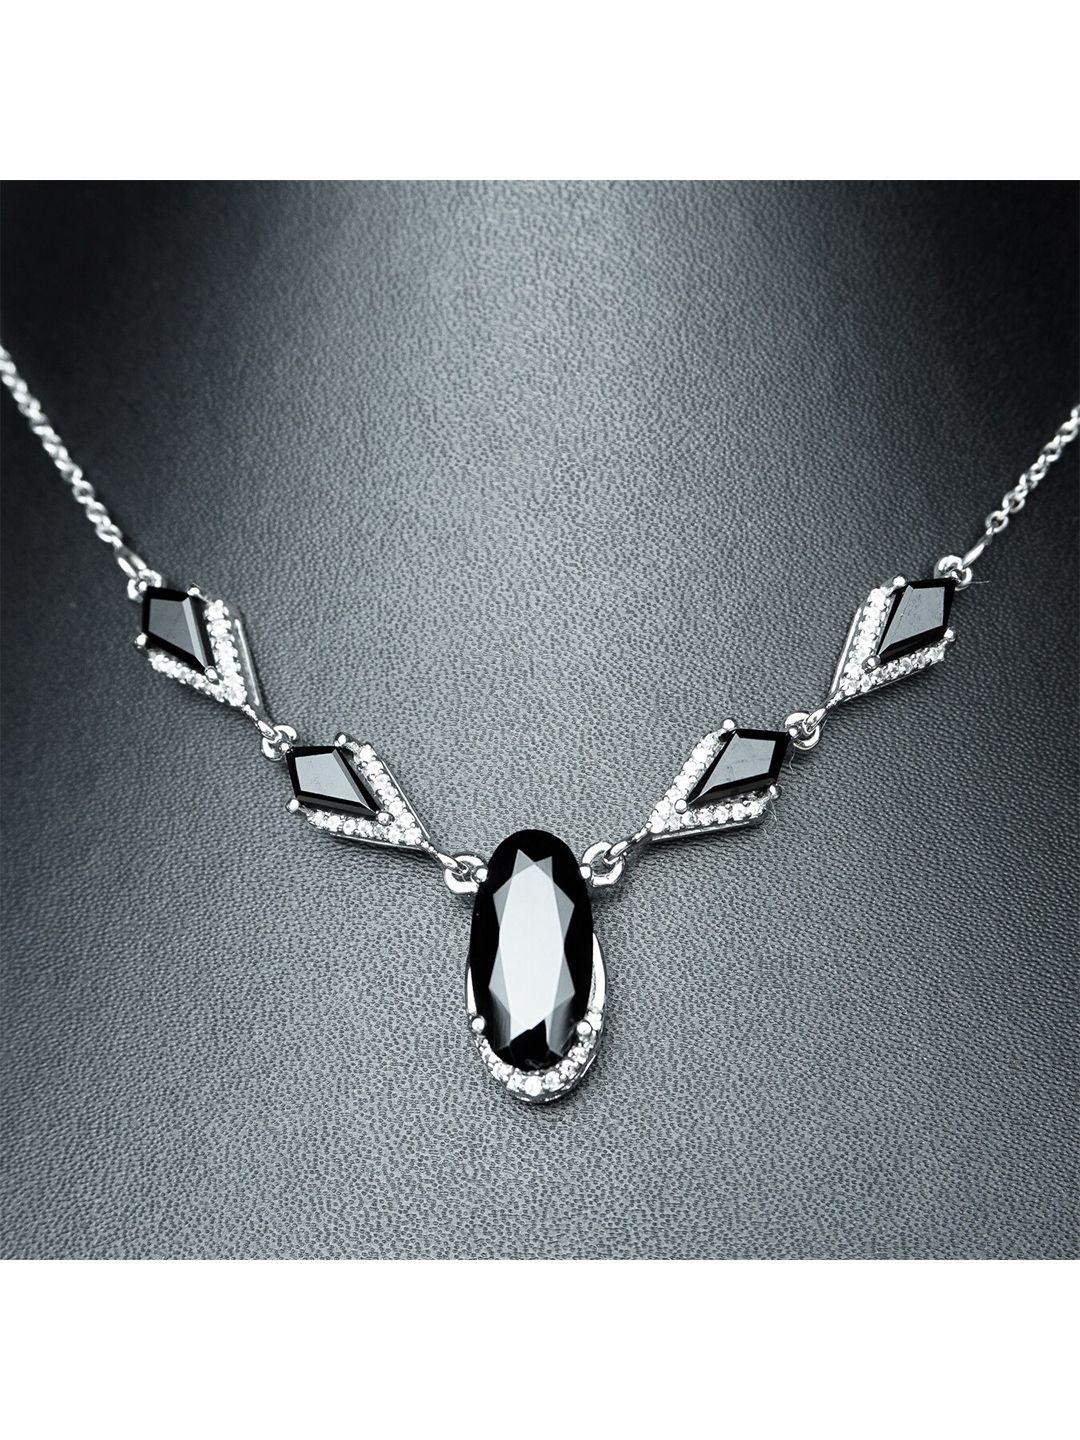 hiflyer jewels black & silver-toned rhodium-plated stone-studded necklace